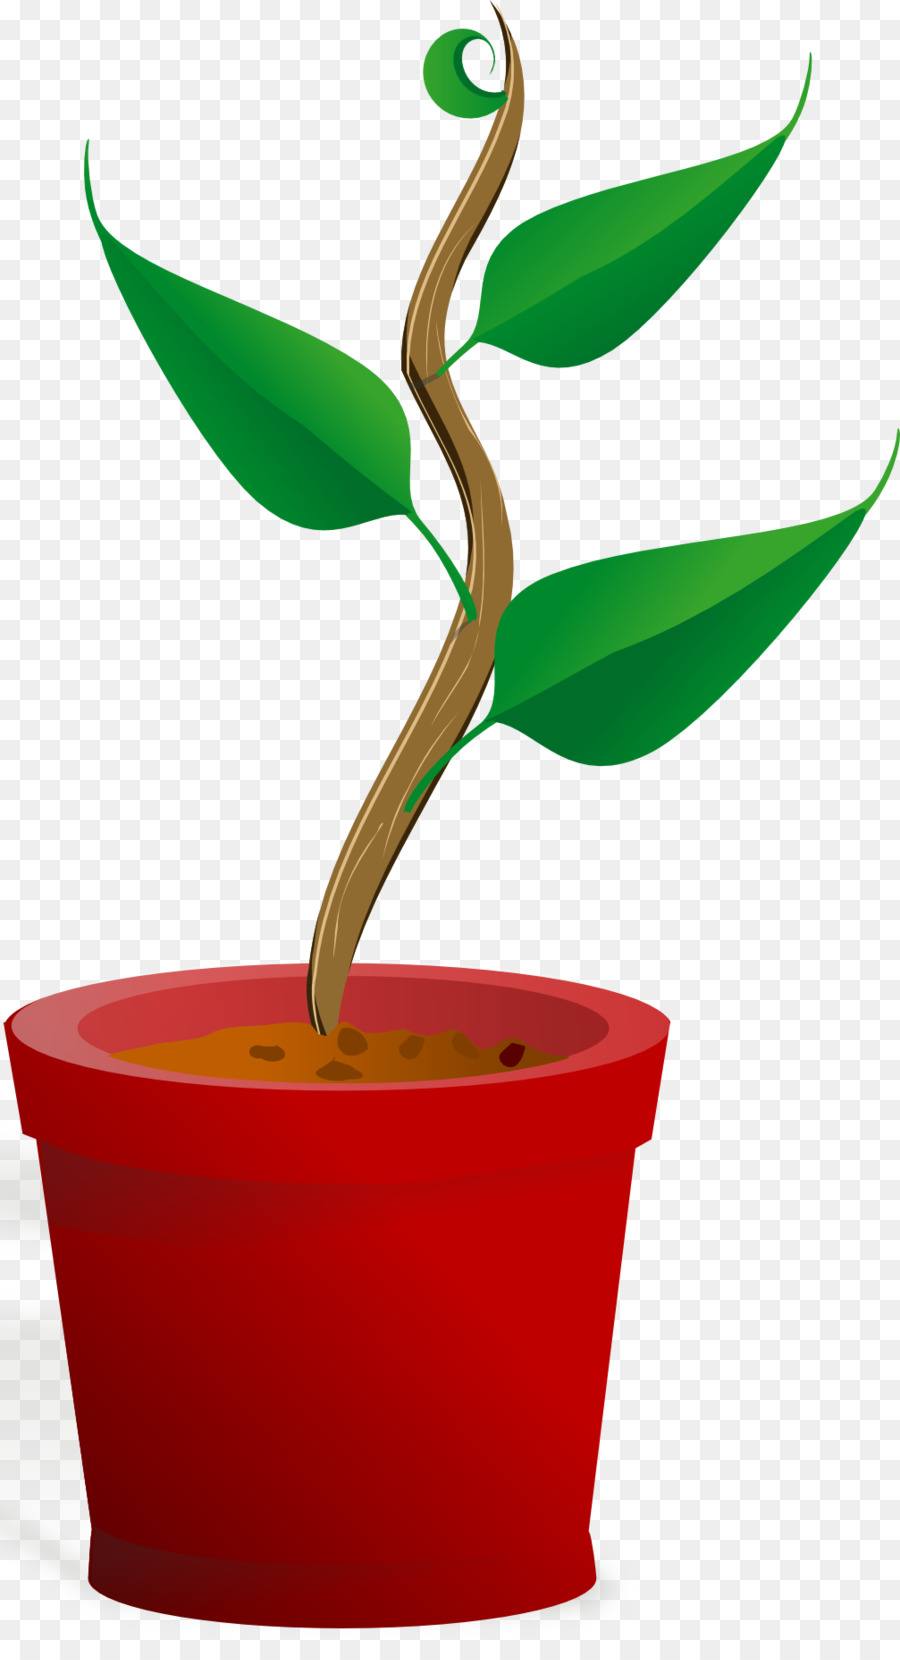 Tree Root png download